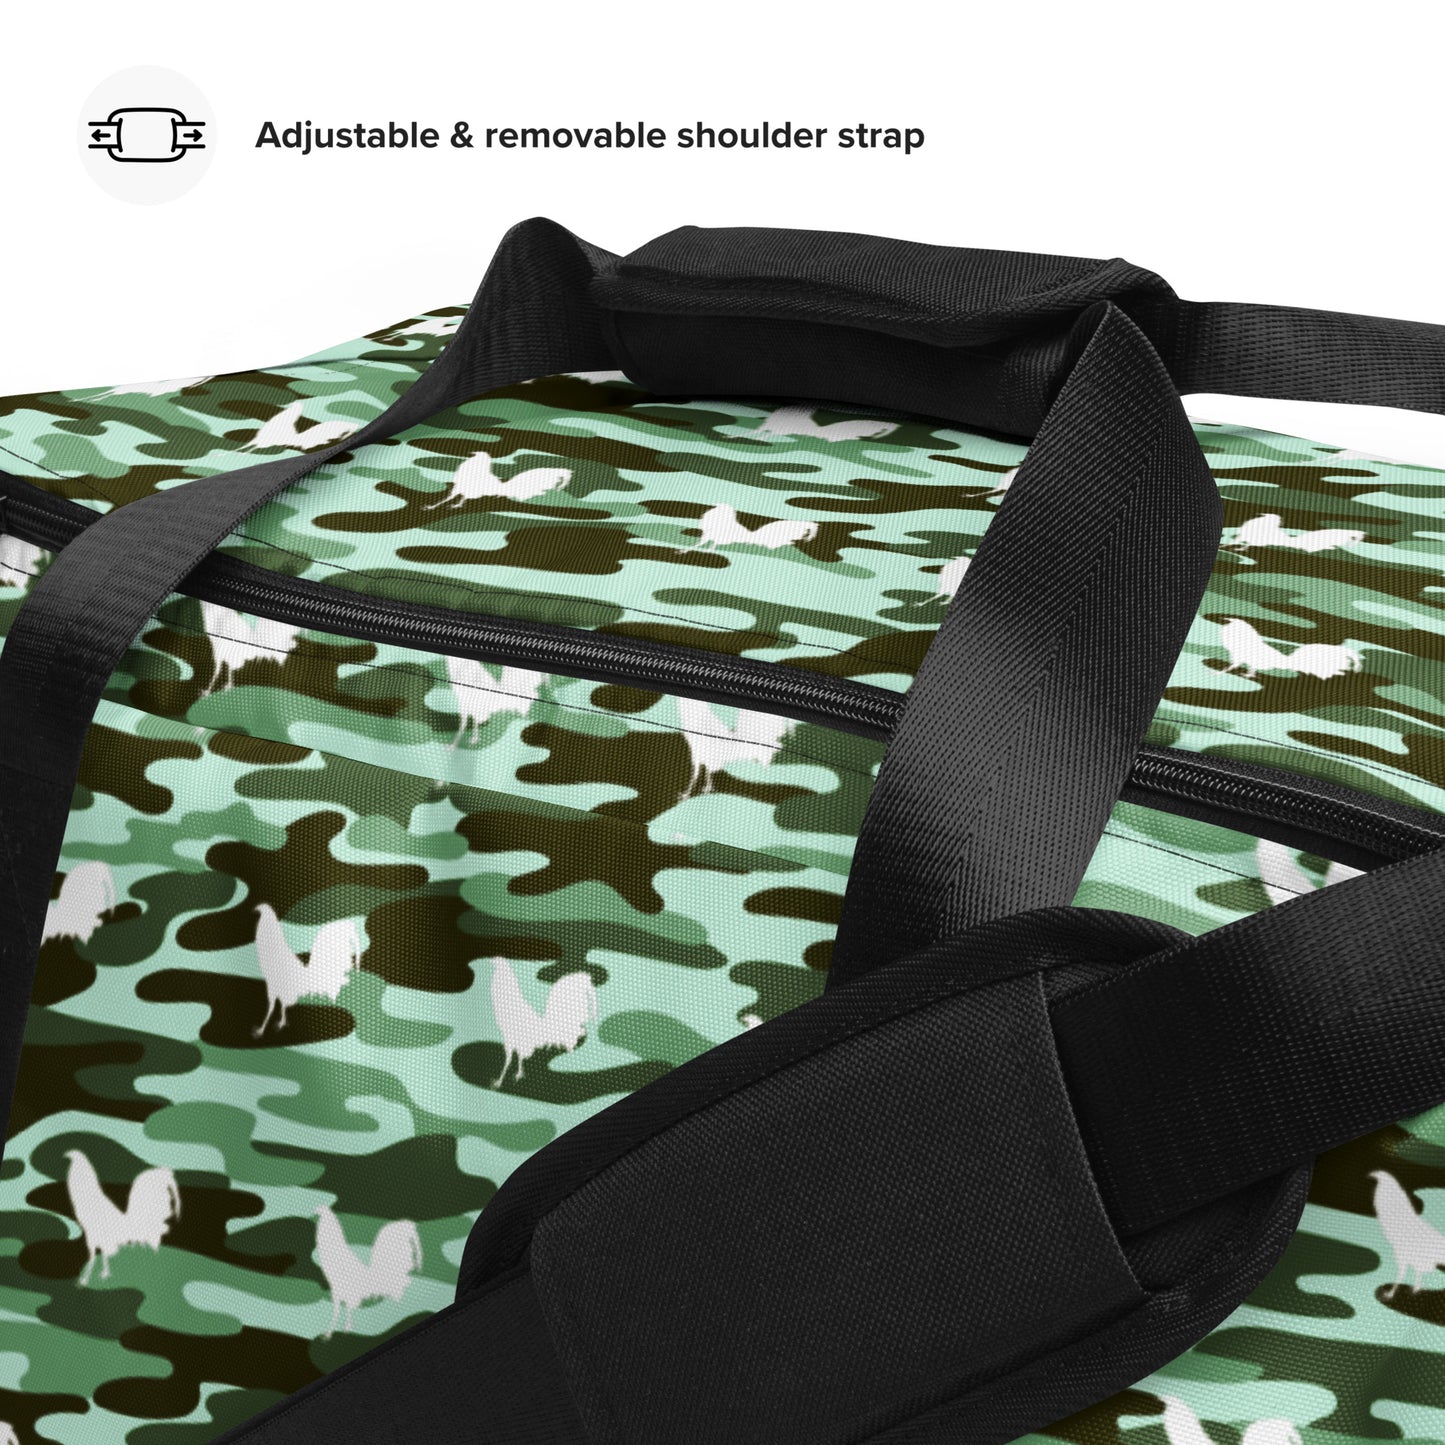 White Cock Mint Camo Gamefowl Rooster Duffle Bag